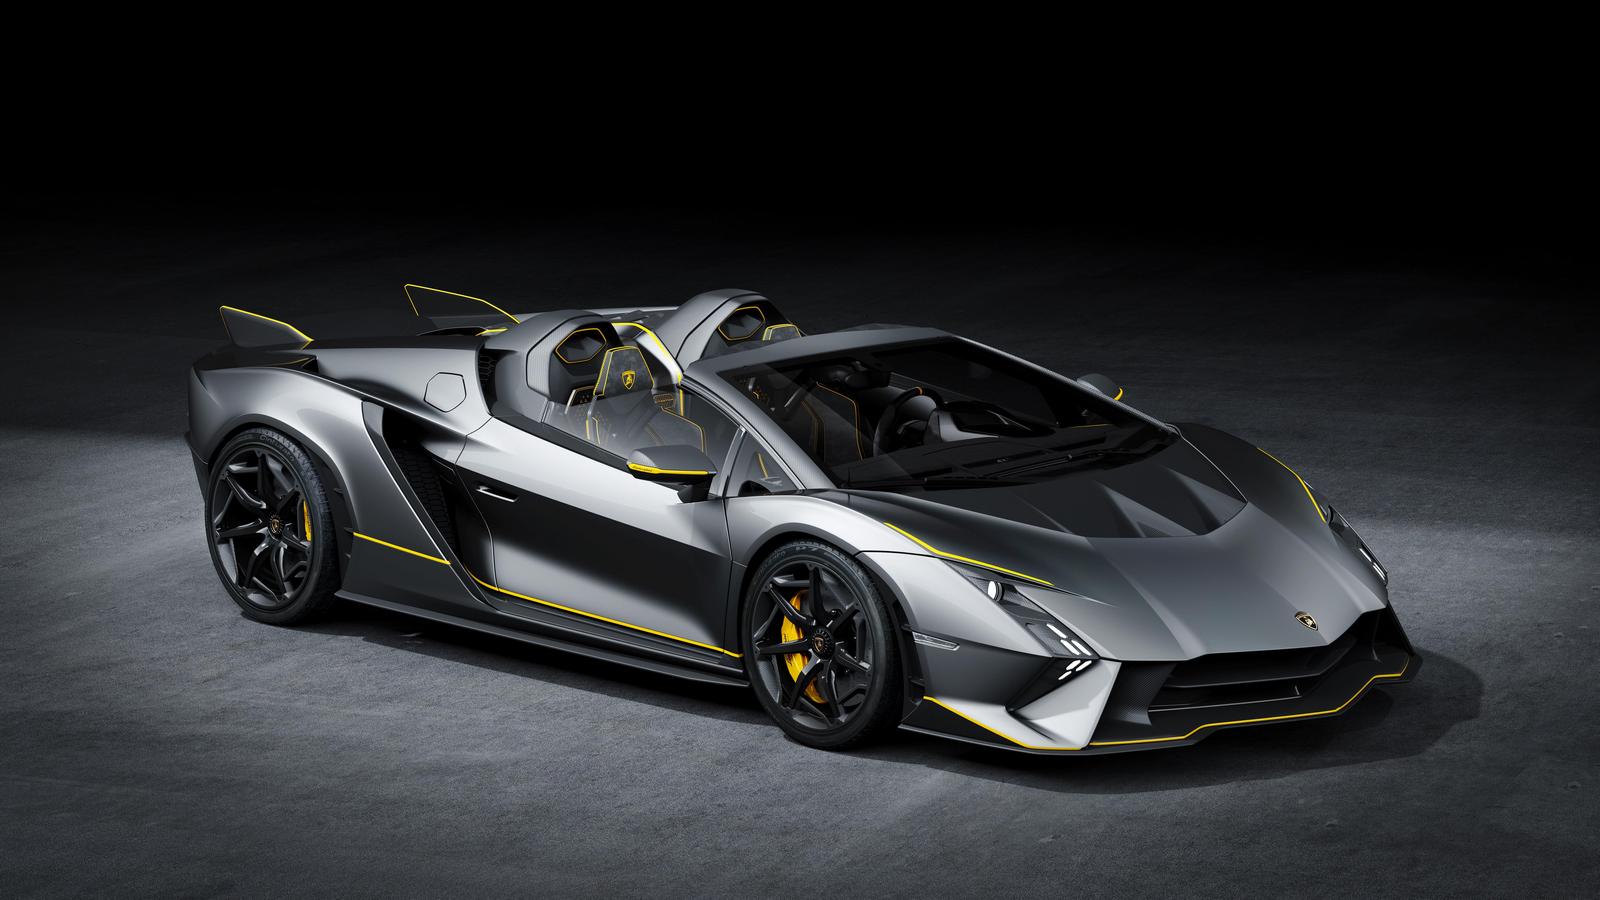 Witness the ultimate expression of Lamborghini's legacy with the Invencible and Autentica supercars.